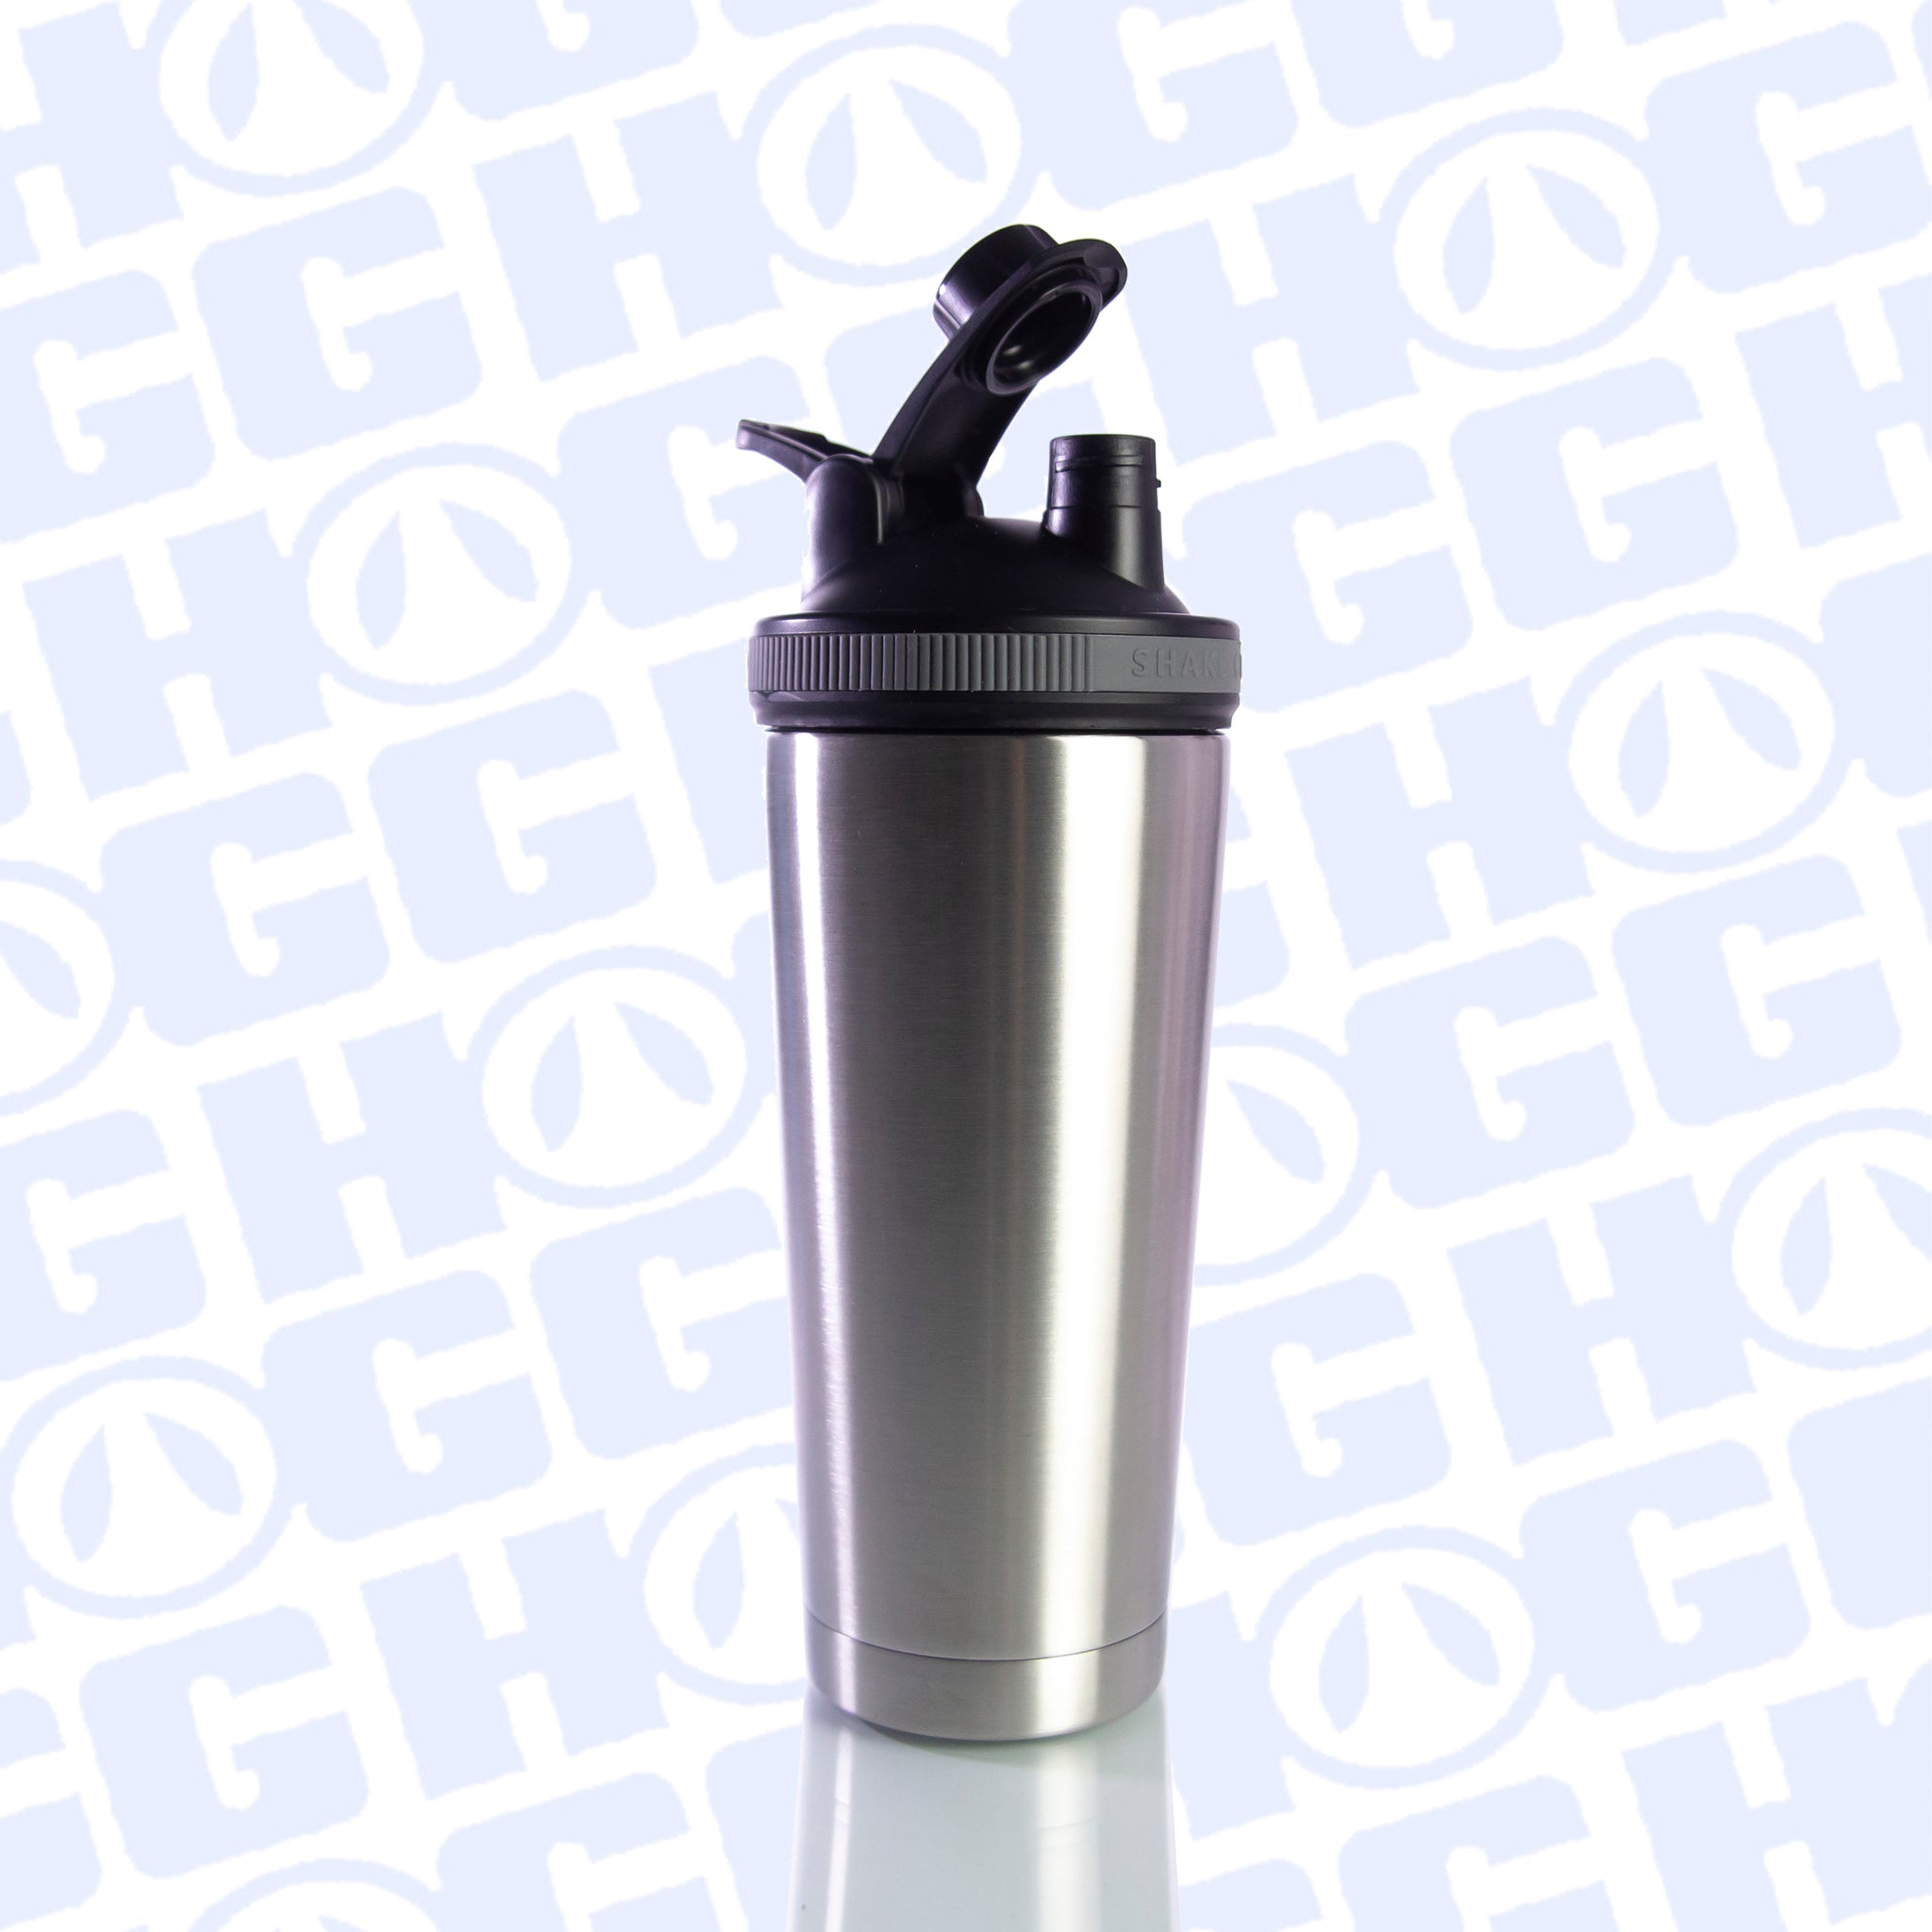 25oz Stainless Steel Protein Shaker Bottle. - SJNJD394 - IdeaStage  Promotional Products